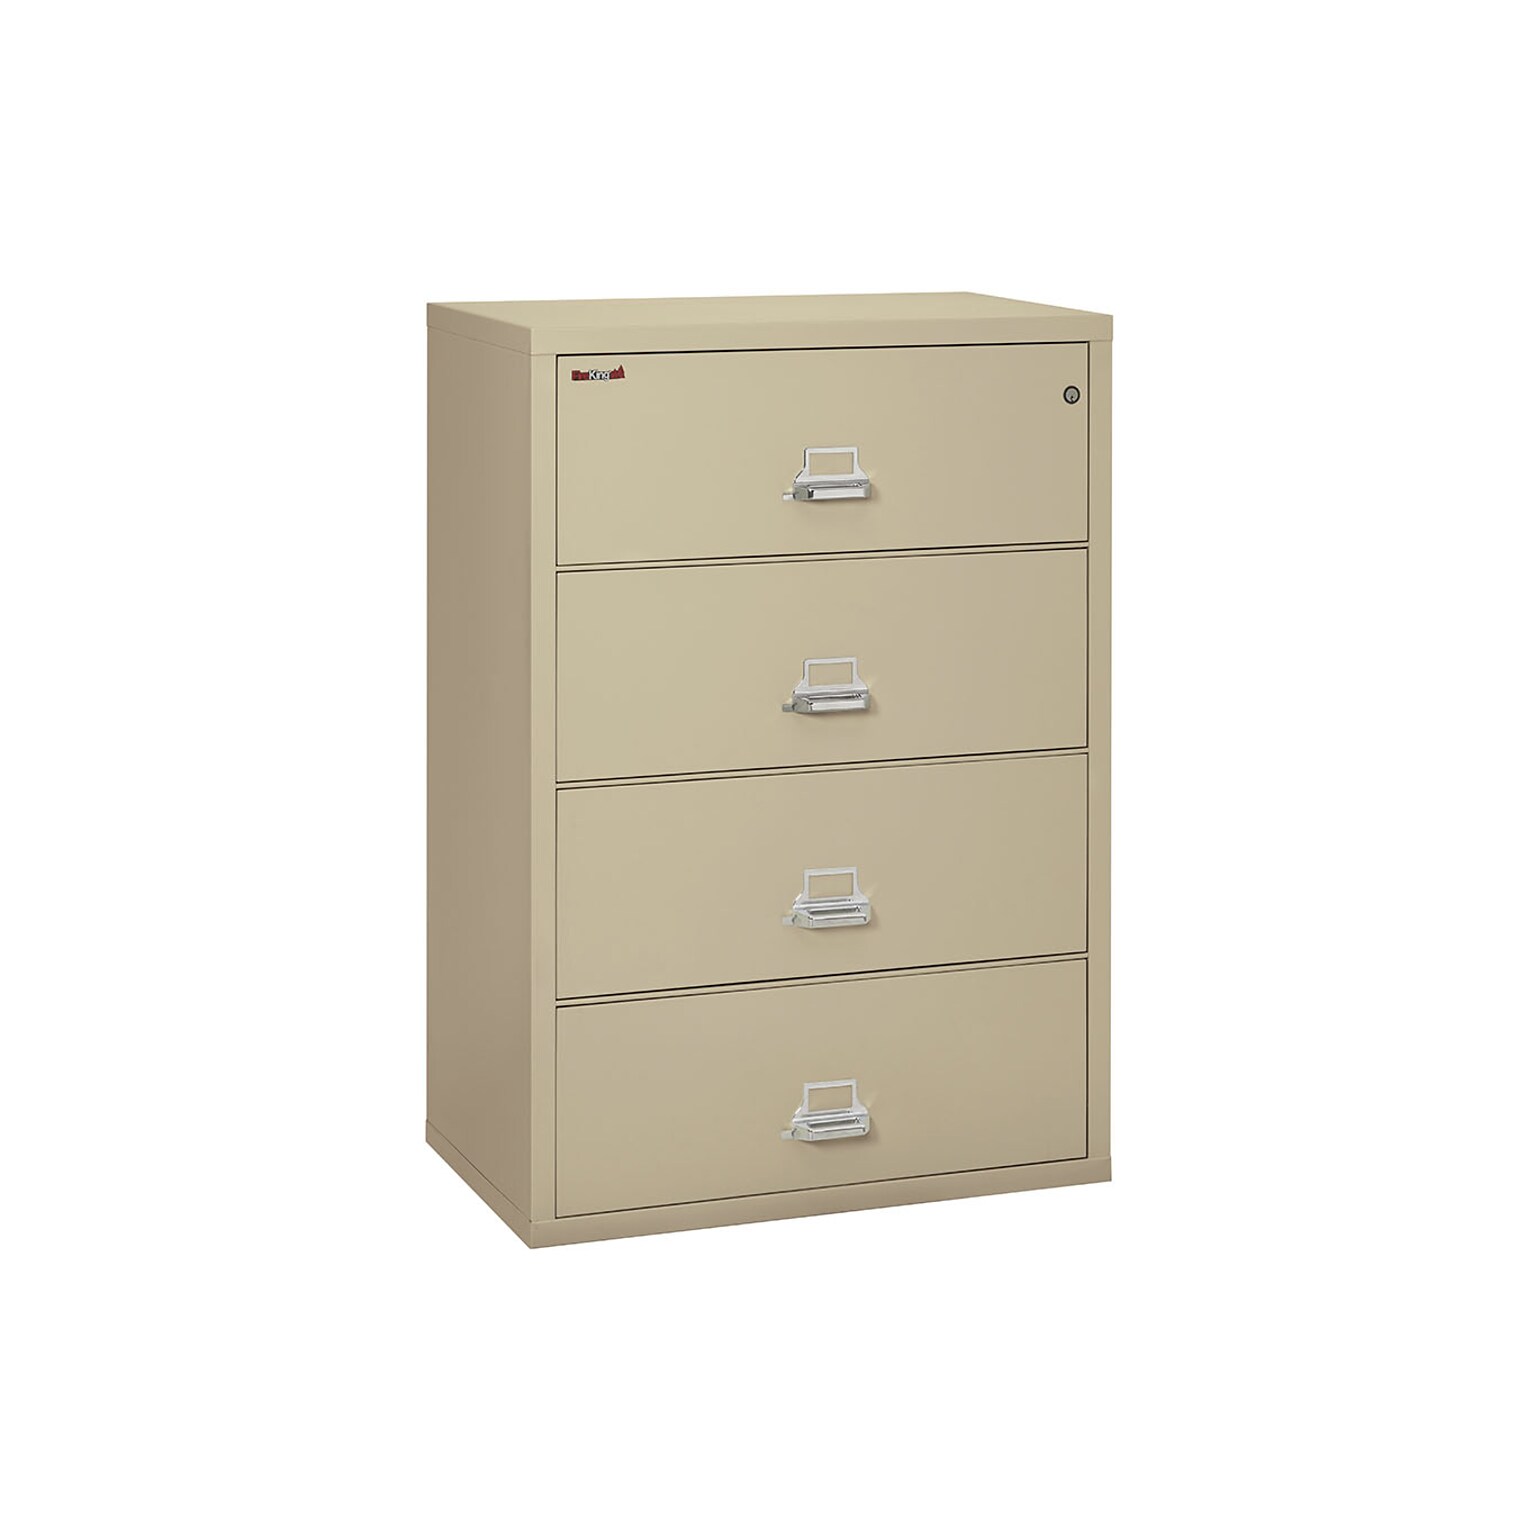 FireKing Classic 4-Drawer Lateral File Cabinet, Fire Resistant, Letter/Legal, Parchment, 37.5W (4-3822-CPA)